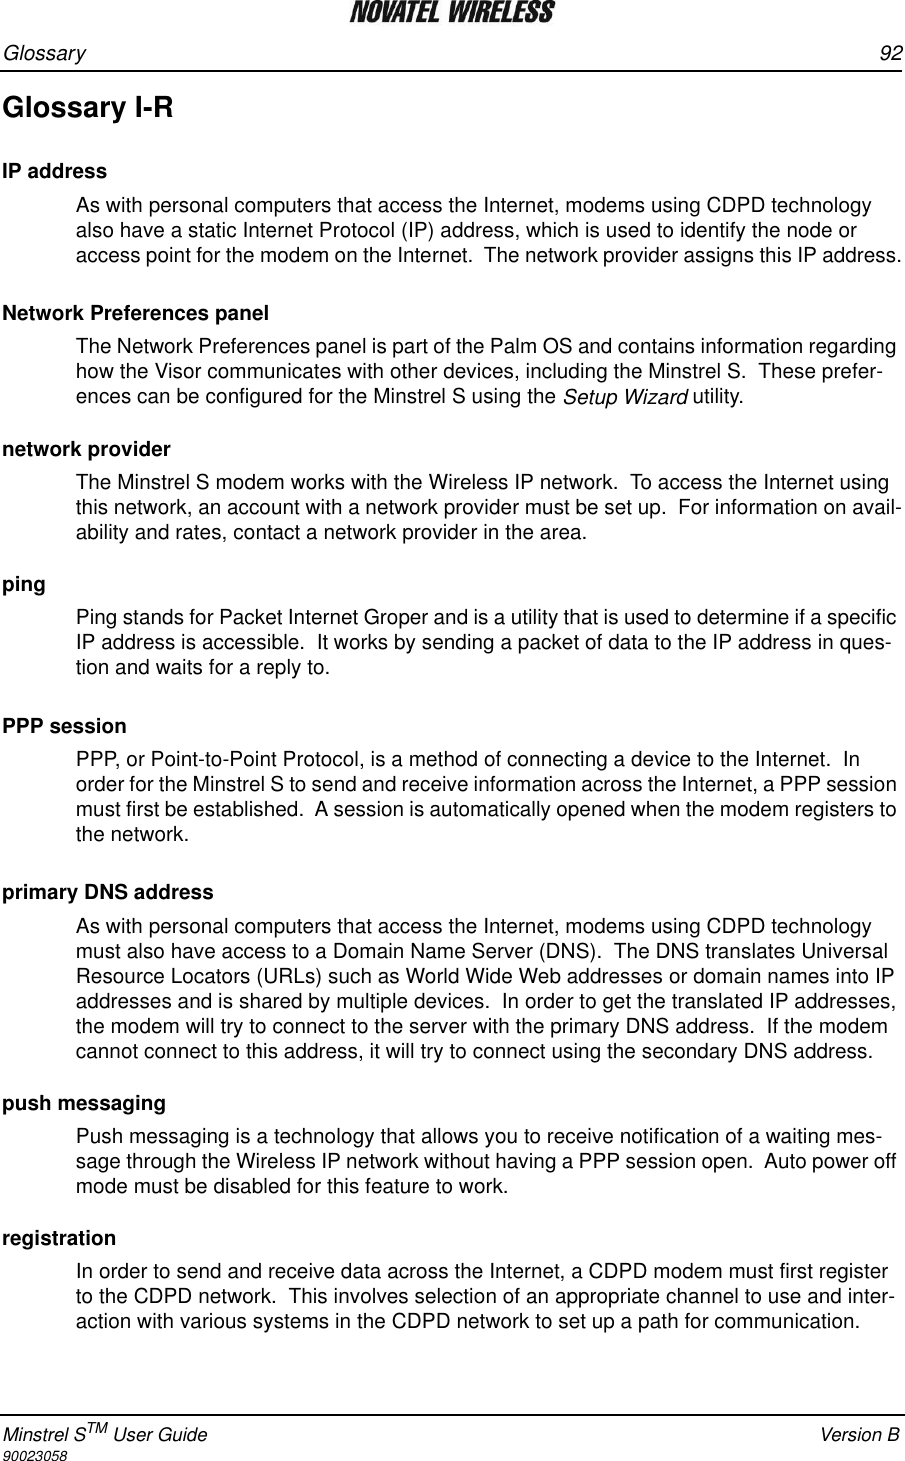 Glossary 92Minstrel STM User Guide Version B90023058Glossary I-RIP addressAs with personal computers that access the Internet, modems using CDPD technology also have a static Internet Protocol (IP) address, which is used to identify the node or access point for the modem on the Internet.  The network provider assigns this IP address. Network Preferences panelThe Network Preferences panel is part of the Palm OS and contains information regarding how the Visor communicates with other devices, including the Minstrel S.  These prefer-ences can be configured for the Minstrel S using the Setup Wizard utility.network providerThe Minstrel S modem works with the Wireless IP network.  To access the Internet using this network, an account with a network provider must be set up.  For information on avail-ability and rates, contact a network provider in the area. pingPing stands for Packet Internet Groper and is a utility that is used to determine if a specific IP address is accessible.  It works by sending a packet of data to the IP address in ques-tion and waits for a reply to.PPP sessionPPP, or Point-to-Point Protocol, is a method of connecting a device to the Internet.  In order for the Minstrel S to send and receive information across the Internet, a PPP session must first be established.  A session is automatically opened when the modem registers to the network.primary DNS addressAs with personal computers that access the Internet, modems using CDPD technology must also have access to a Domain Name Server (DNS).  The DNS translates Universal Resource Locators (URLs) such as World Wide Web addresses or domain names into IP addresses and is shared by multiple devices.  In order to get the translated IP addresses, the modem will try to connect to the server with the primary DNS address.  If the modem cannot connect to this address, it will try to connect using the secondary DNS address.push messagingPush messaging is a technology that allows you to receive notification of a waiting mes-sage through the Wireless IP network without having a PPP session open.  Auto power off mode must be disabled for this feature to work.registrationIn order to send and receive data across the Internet, a CDPD modem must first register to the CDPD network.  This involves selection of an appropriate channel to use and inter-action with various systems in the CDPD network to set up a path for communication.